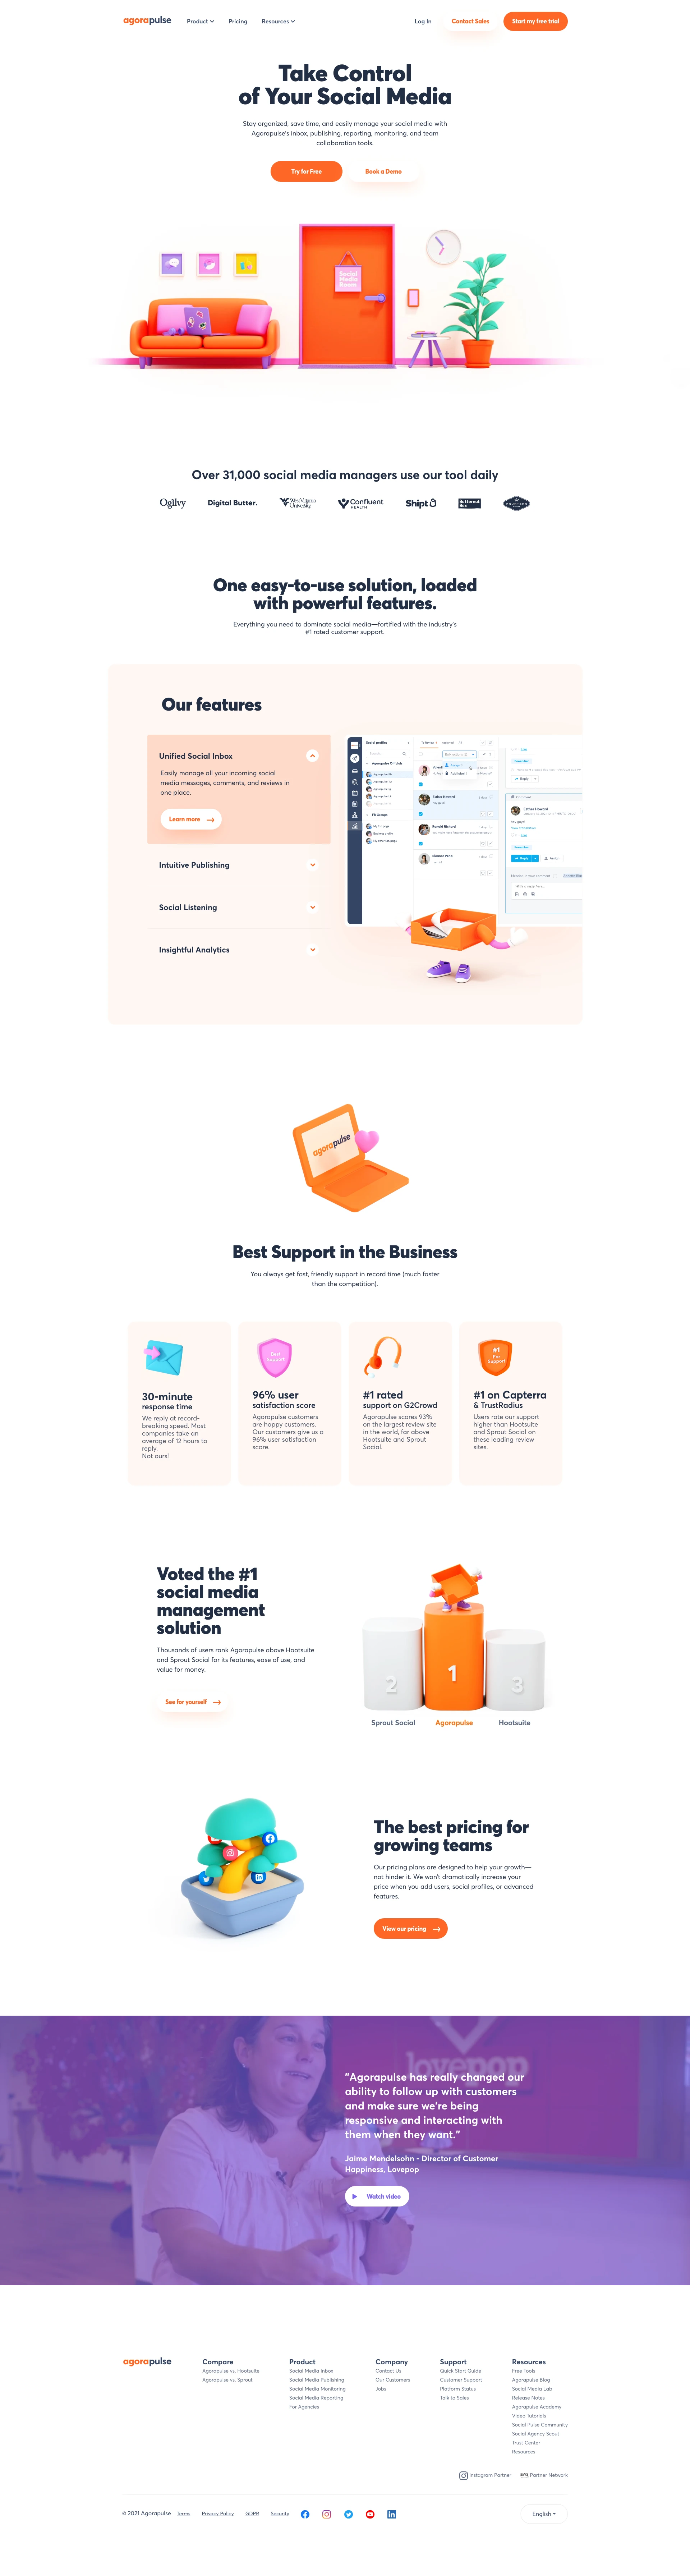 Agorapulse Landing Page Example: An easy to use Social Media Management Software that allows you to stay organized, save time, and easily manage your inbox, publishing, reporting, monitoring, and team collaboration tools.